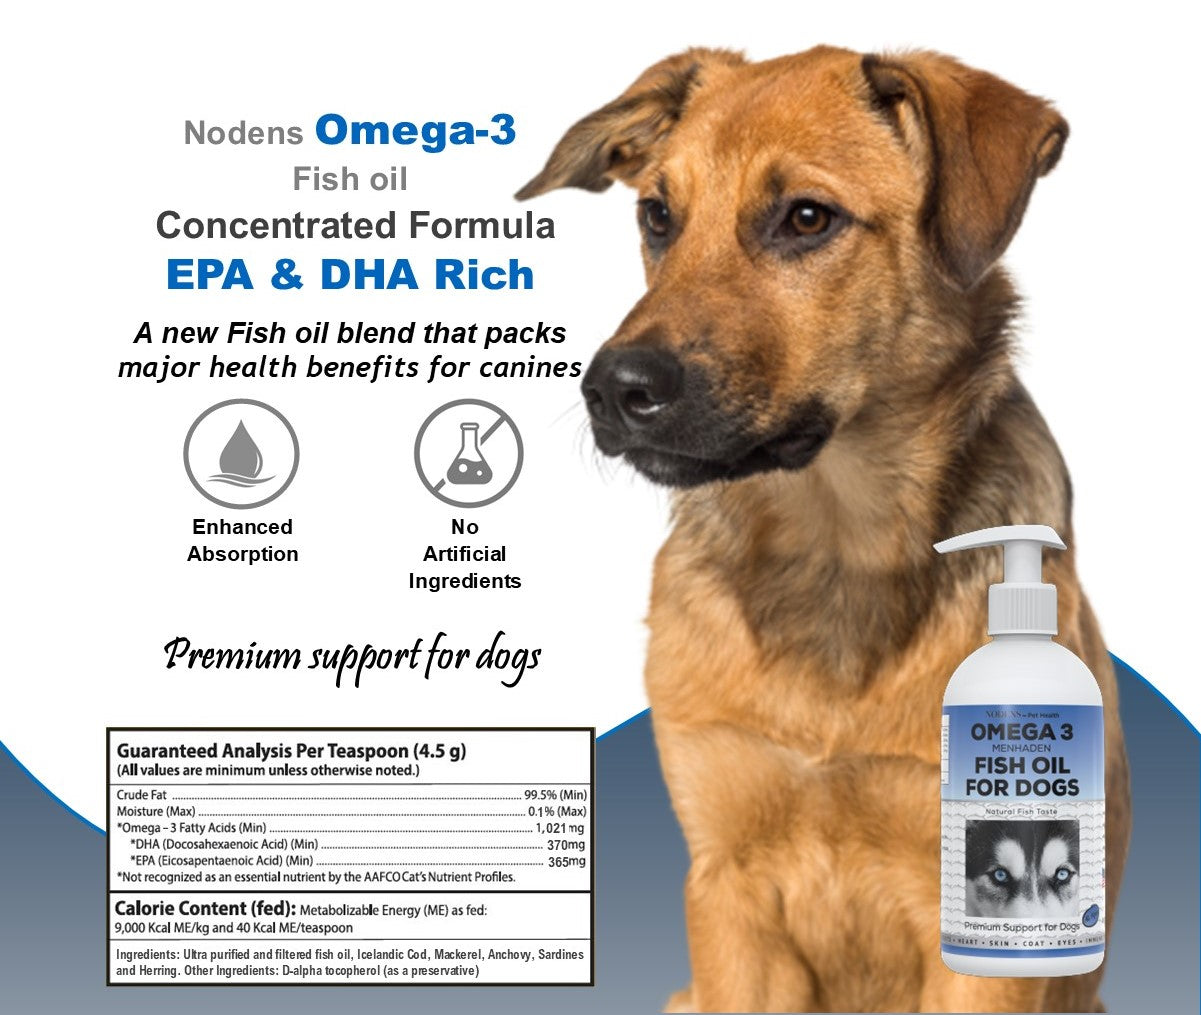 Nodens Omega-3 fish oil for dogs